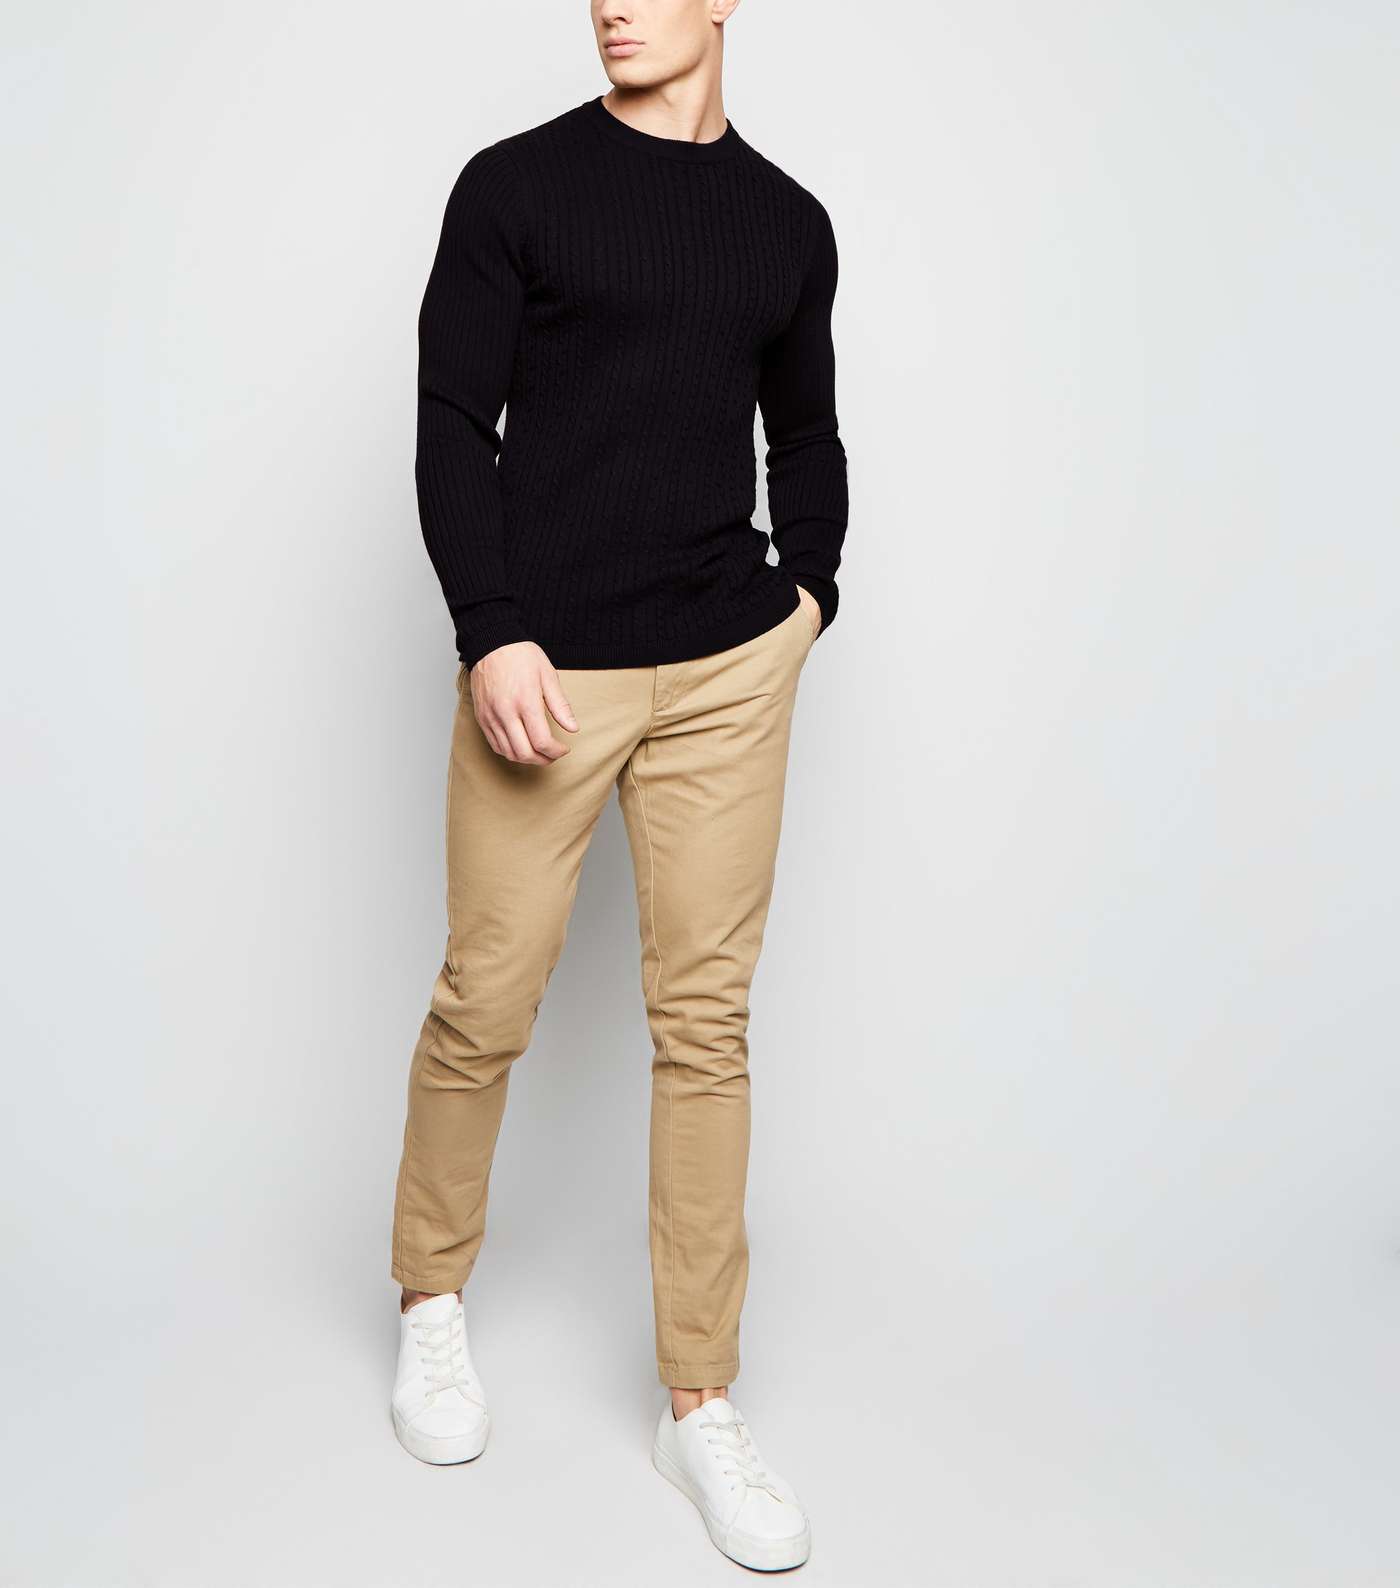 Black Long Sleeve Cable Knit Jumper Image 2